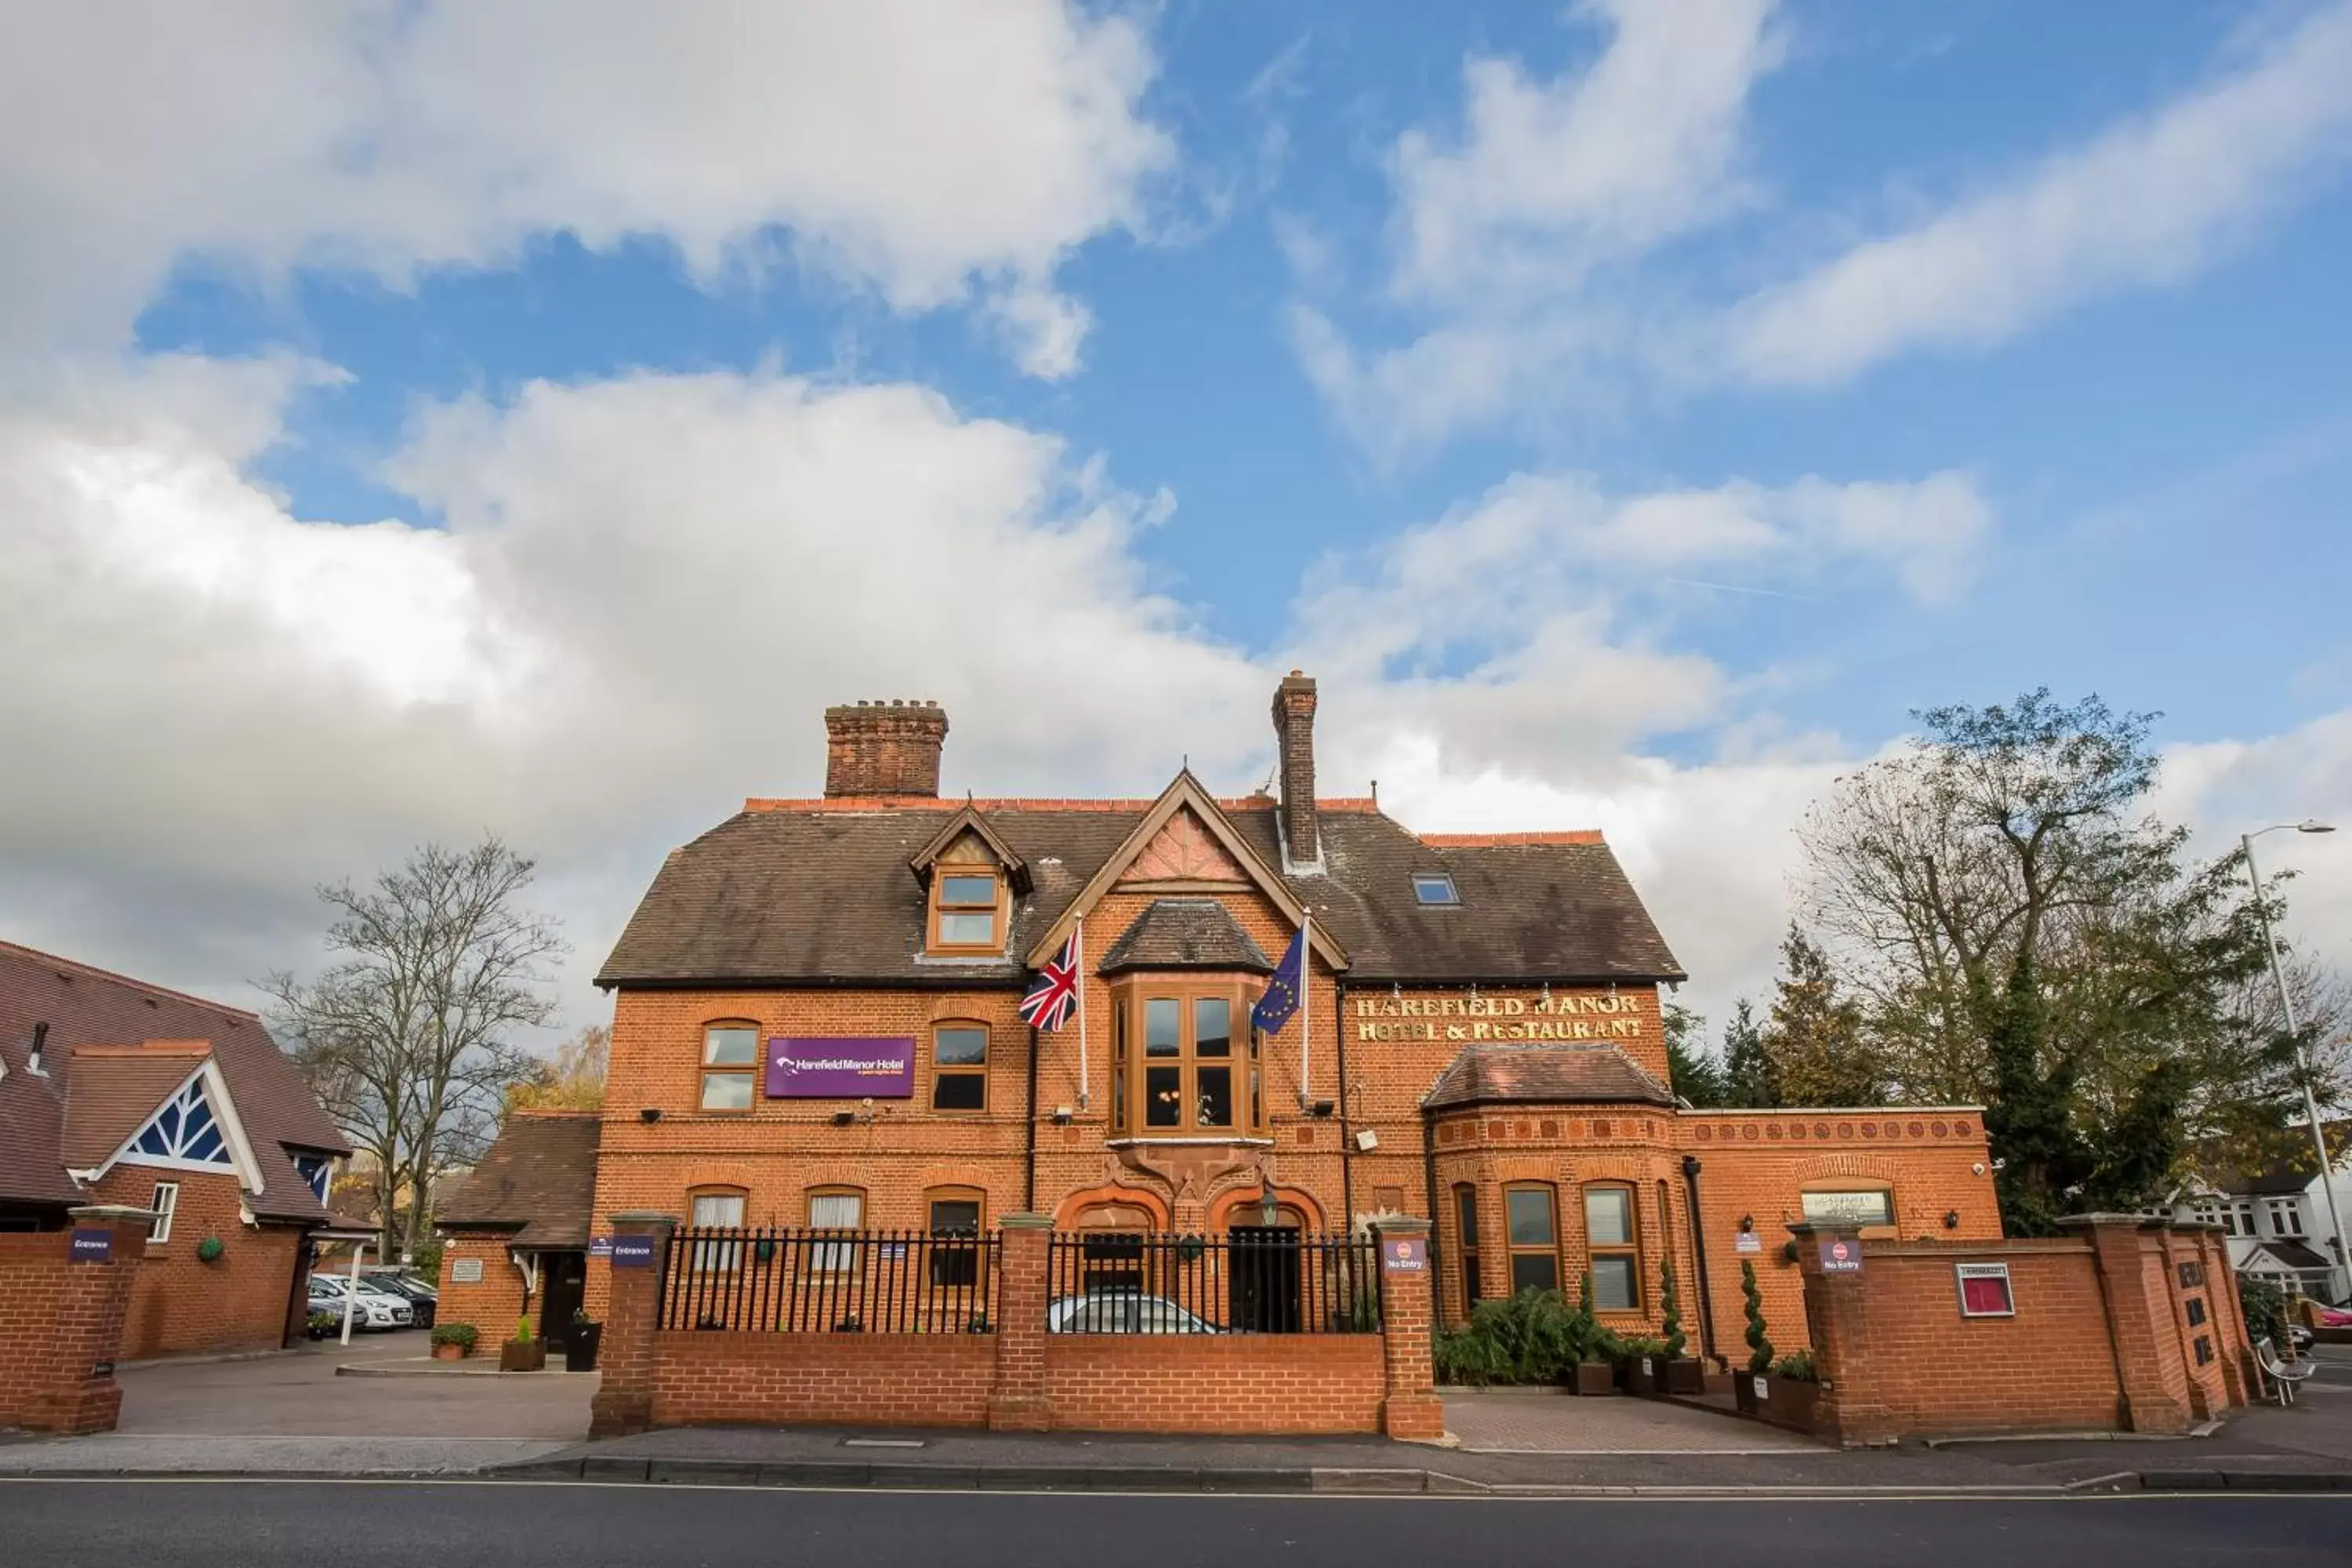 Property Building in Harefield Manor Hotel